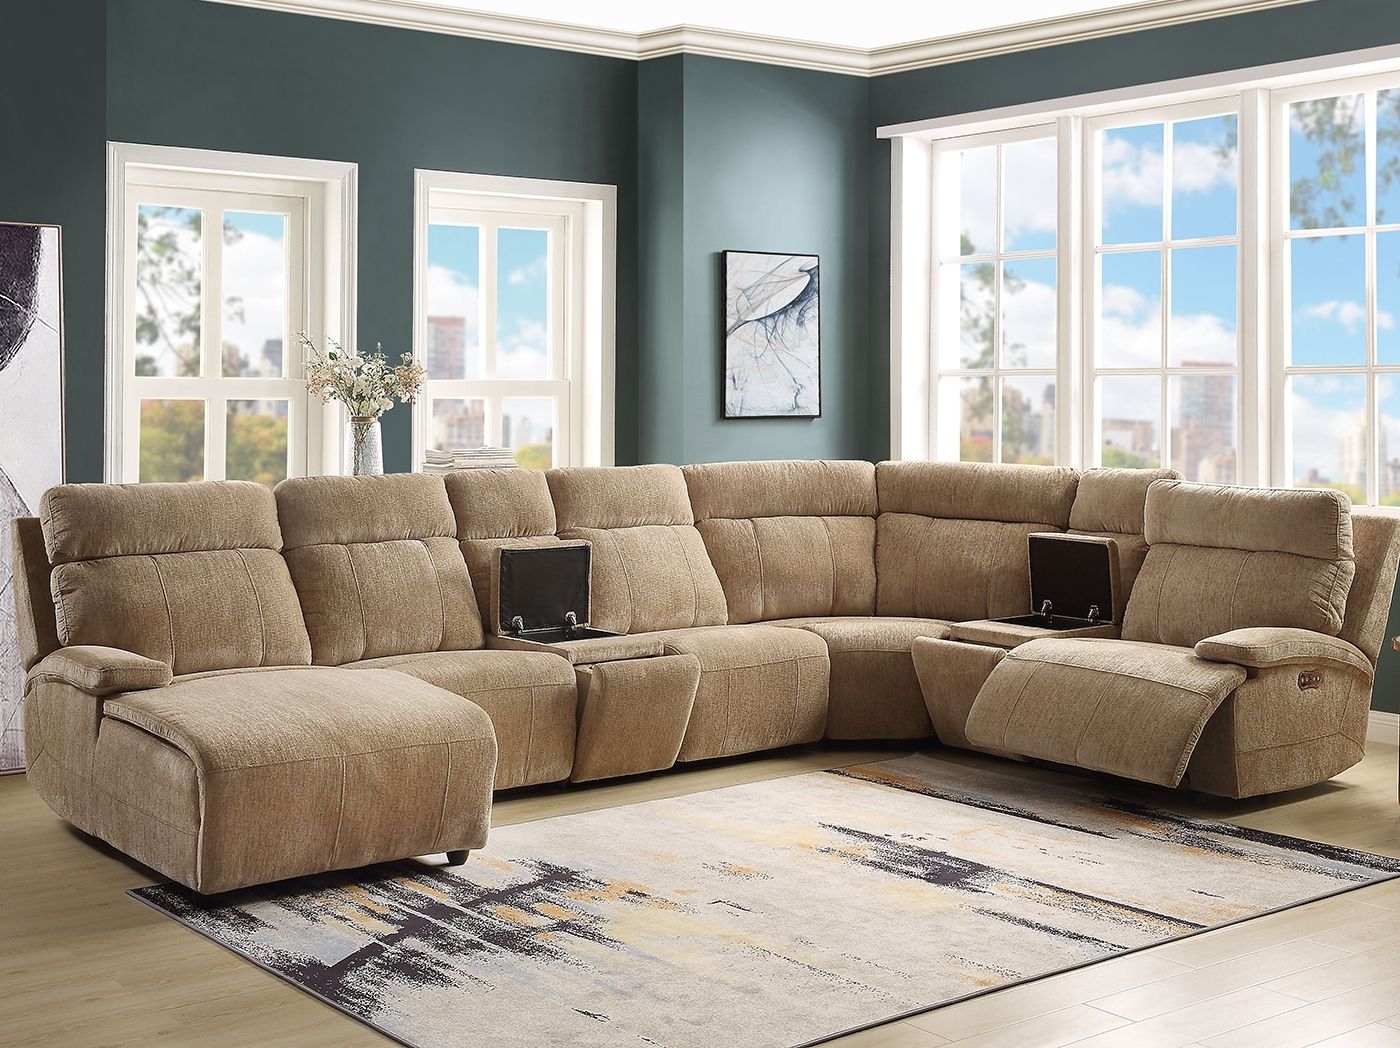 Clearance – Living Room | Steinhafels With Harper Foam 3 Piece Sectionals With Raf Chaise (View 24 of 30)